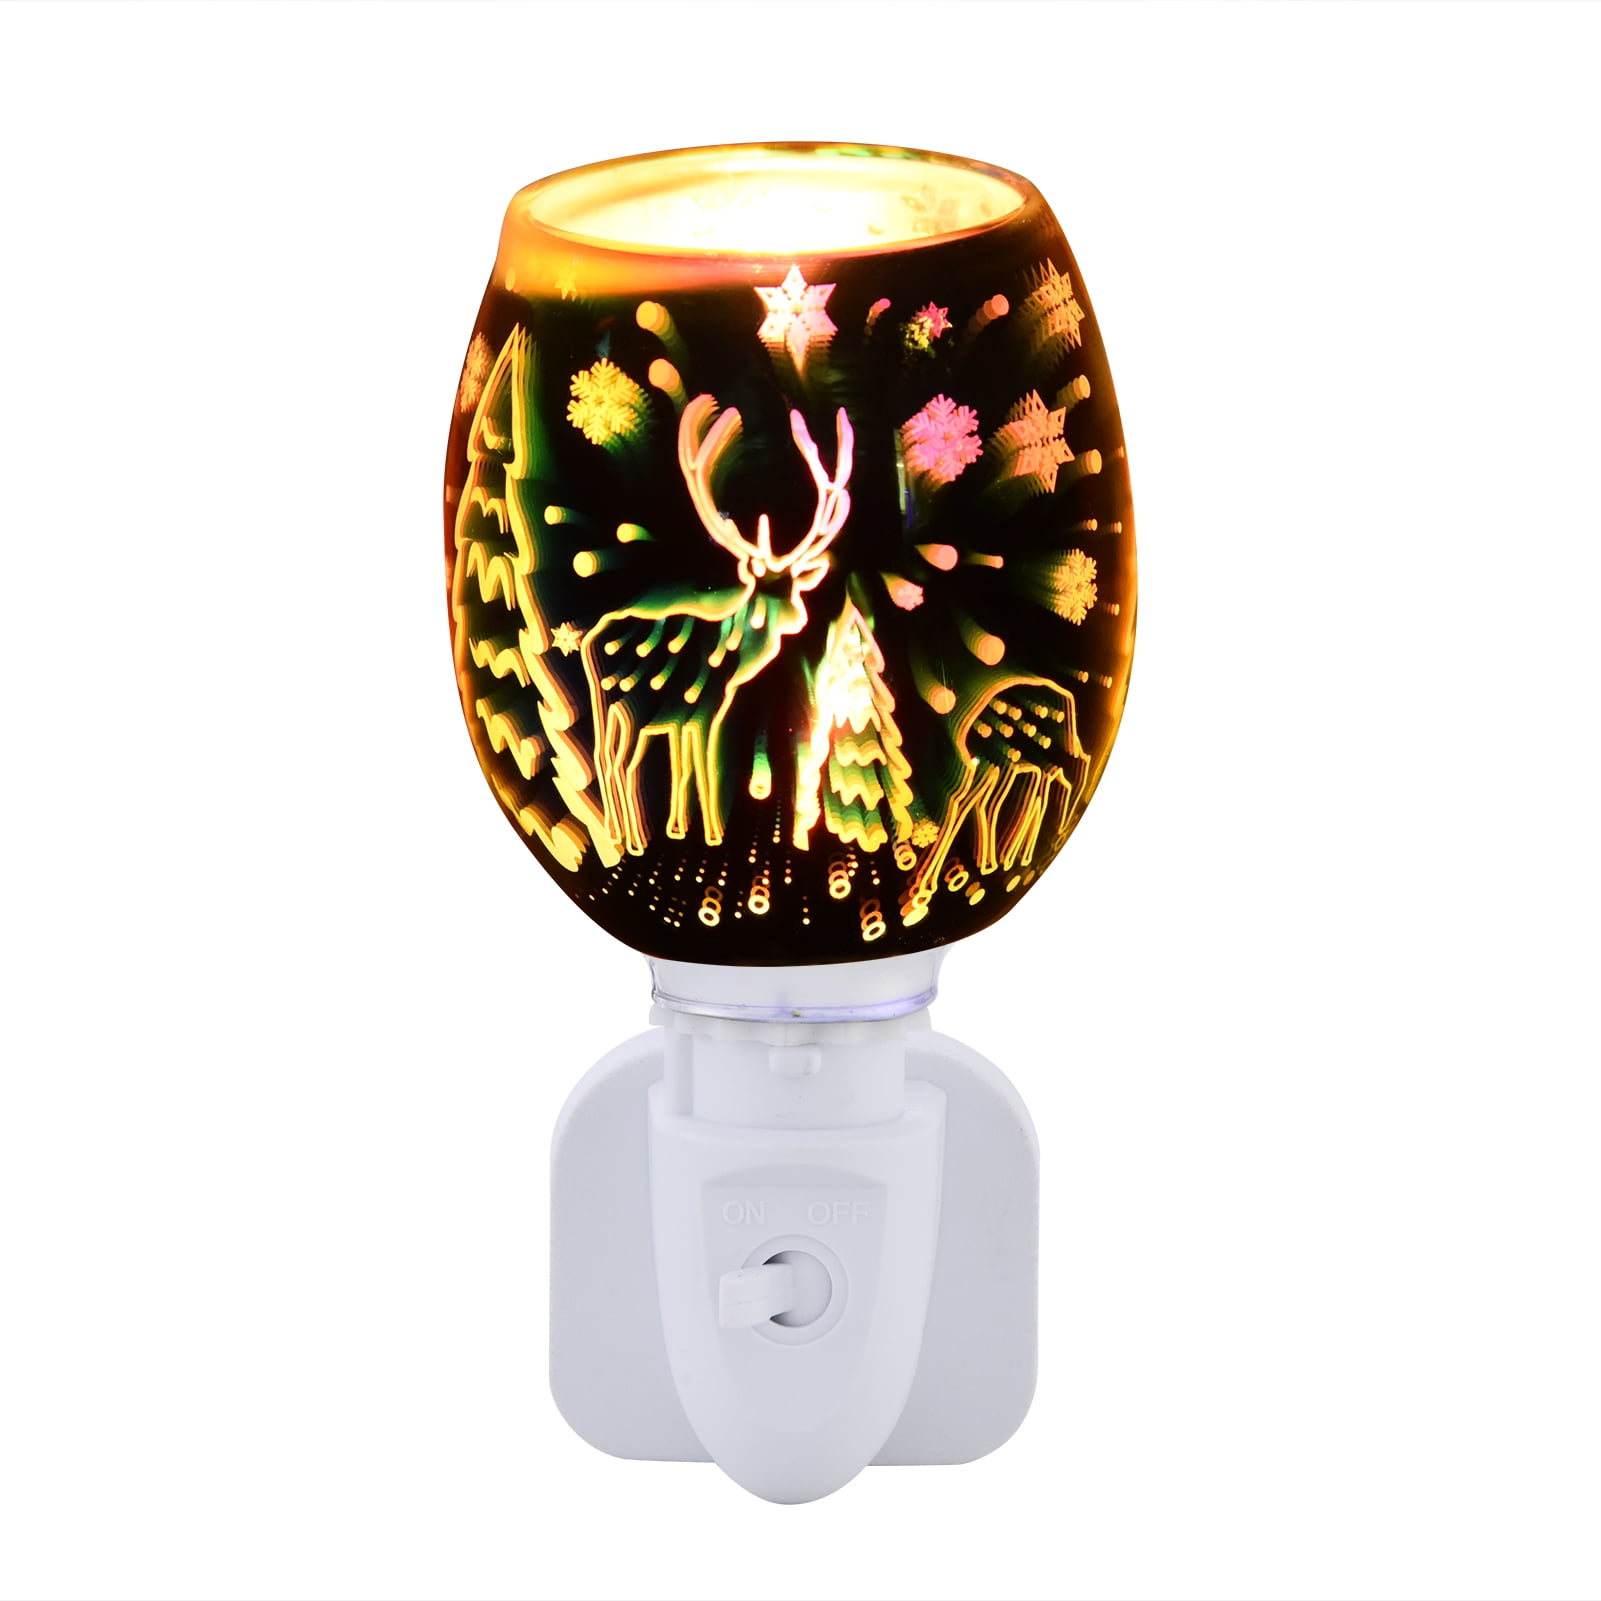 3D Glass Pluggable Fragrance Warmer Plug-in Wax Melt Warmer For Bedroom Hotel